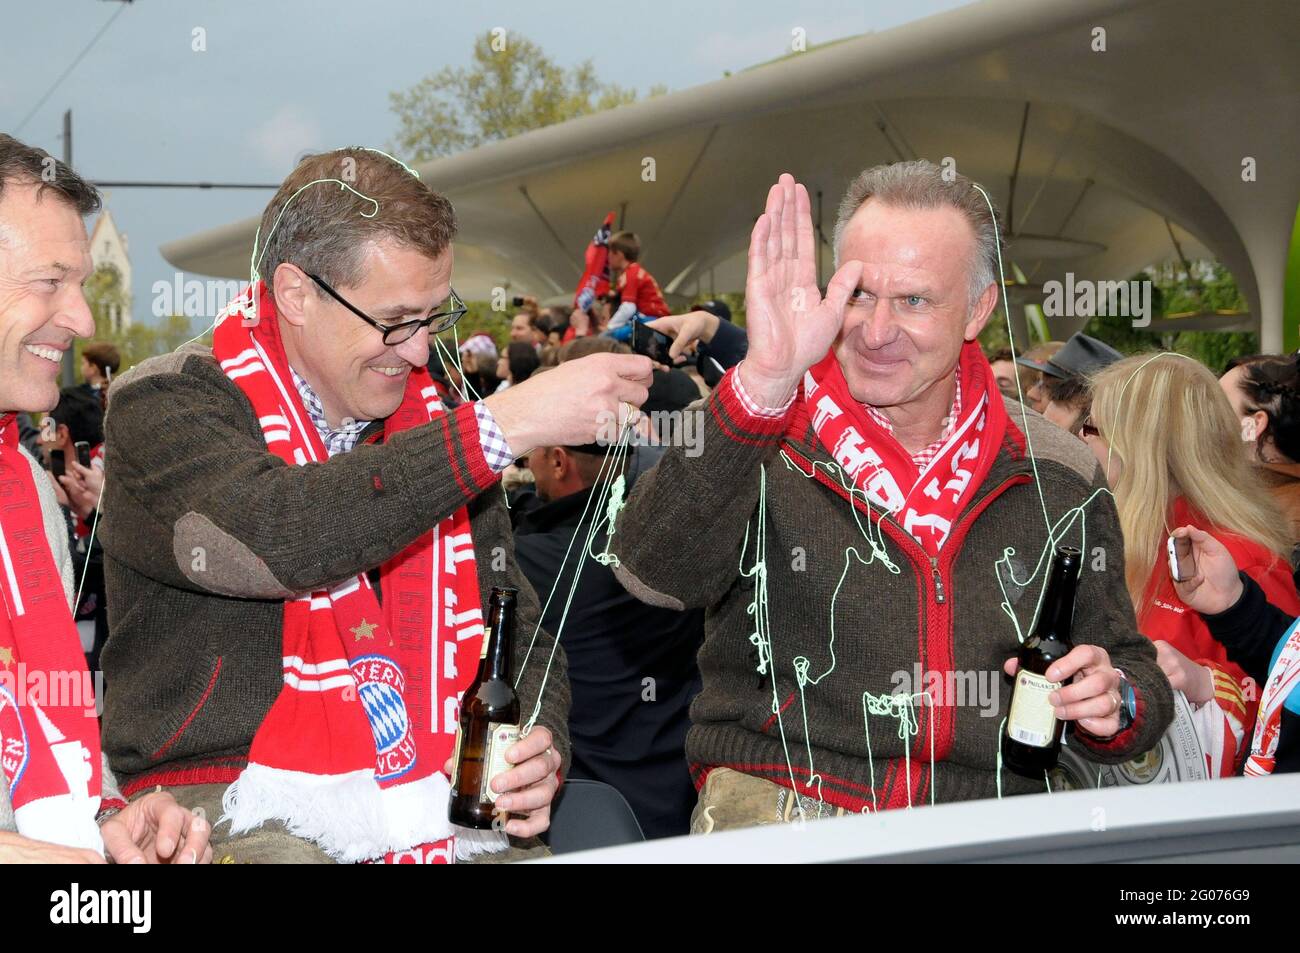 Andreas Jung, Jan-Christian Dreesen, Karl-Heinz Rummenigge and FC Bayern Munich fans celebrate the win of the German Football Championship 2013 Stock Photo